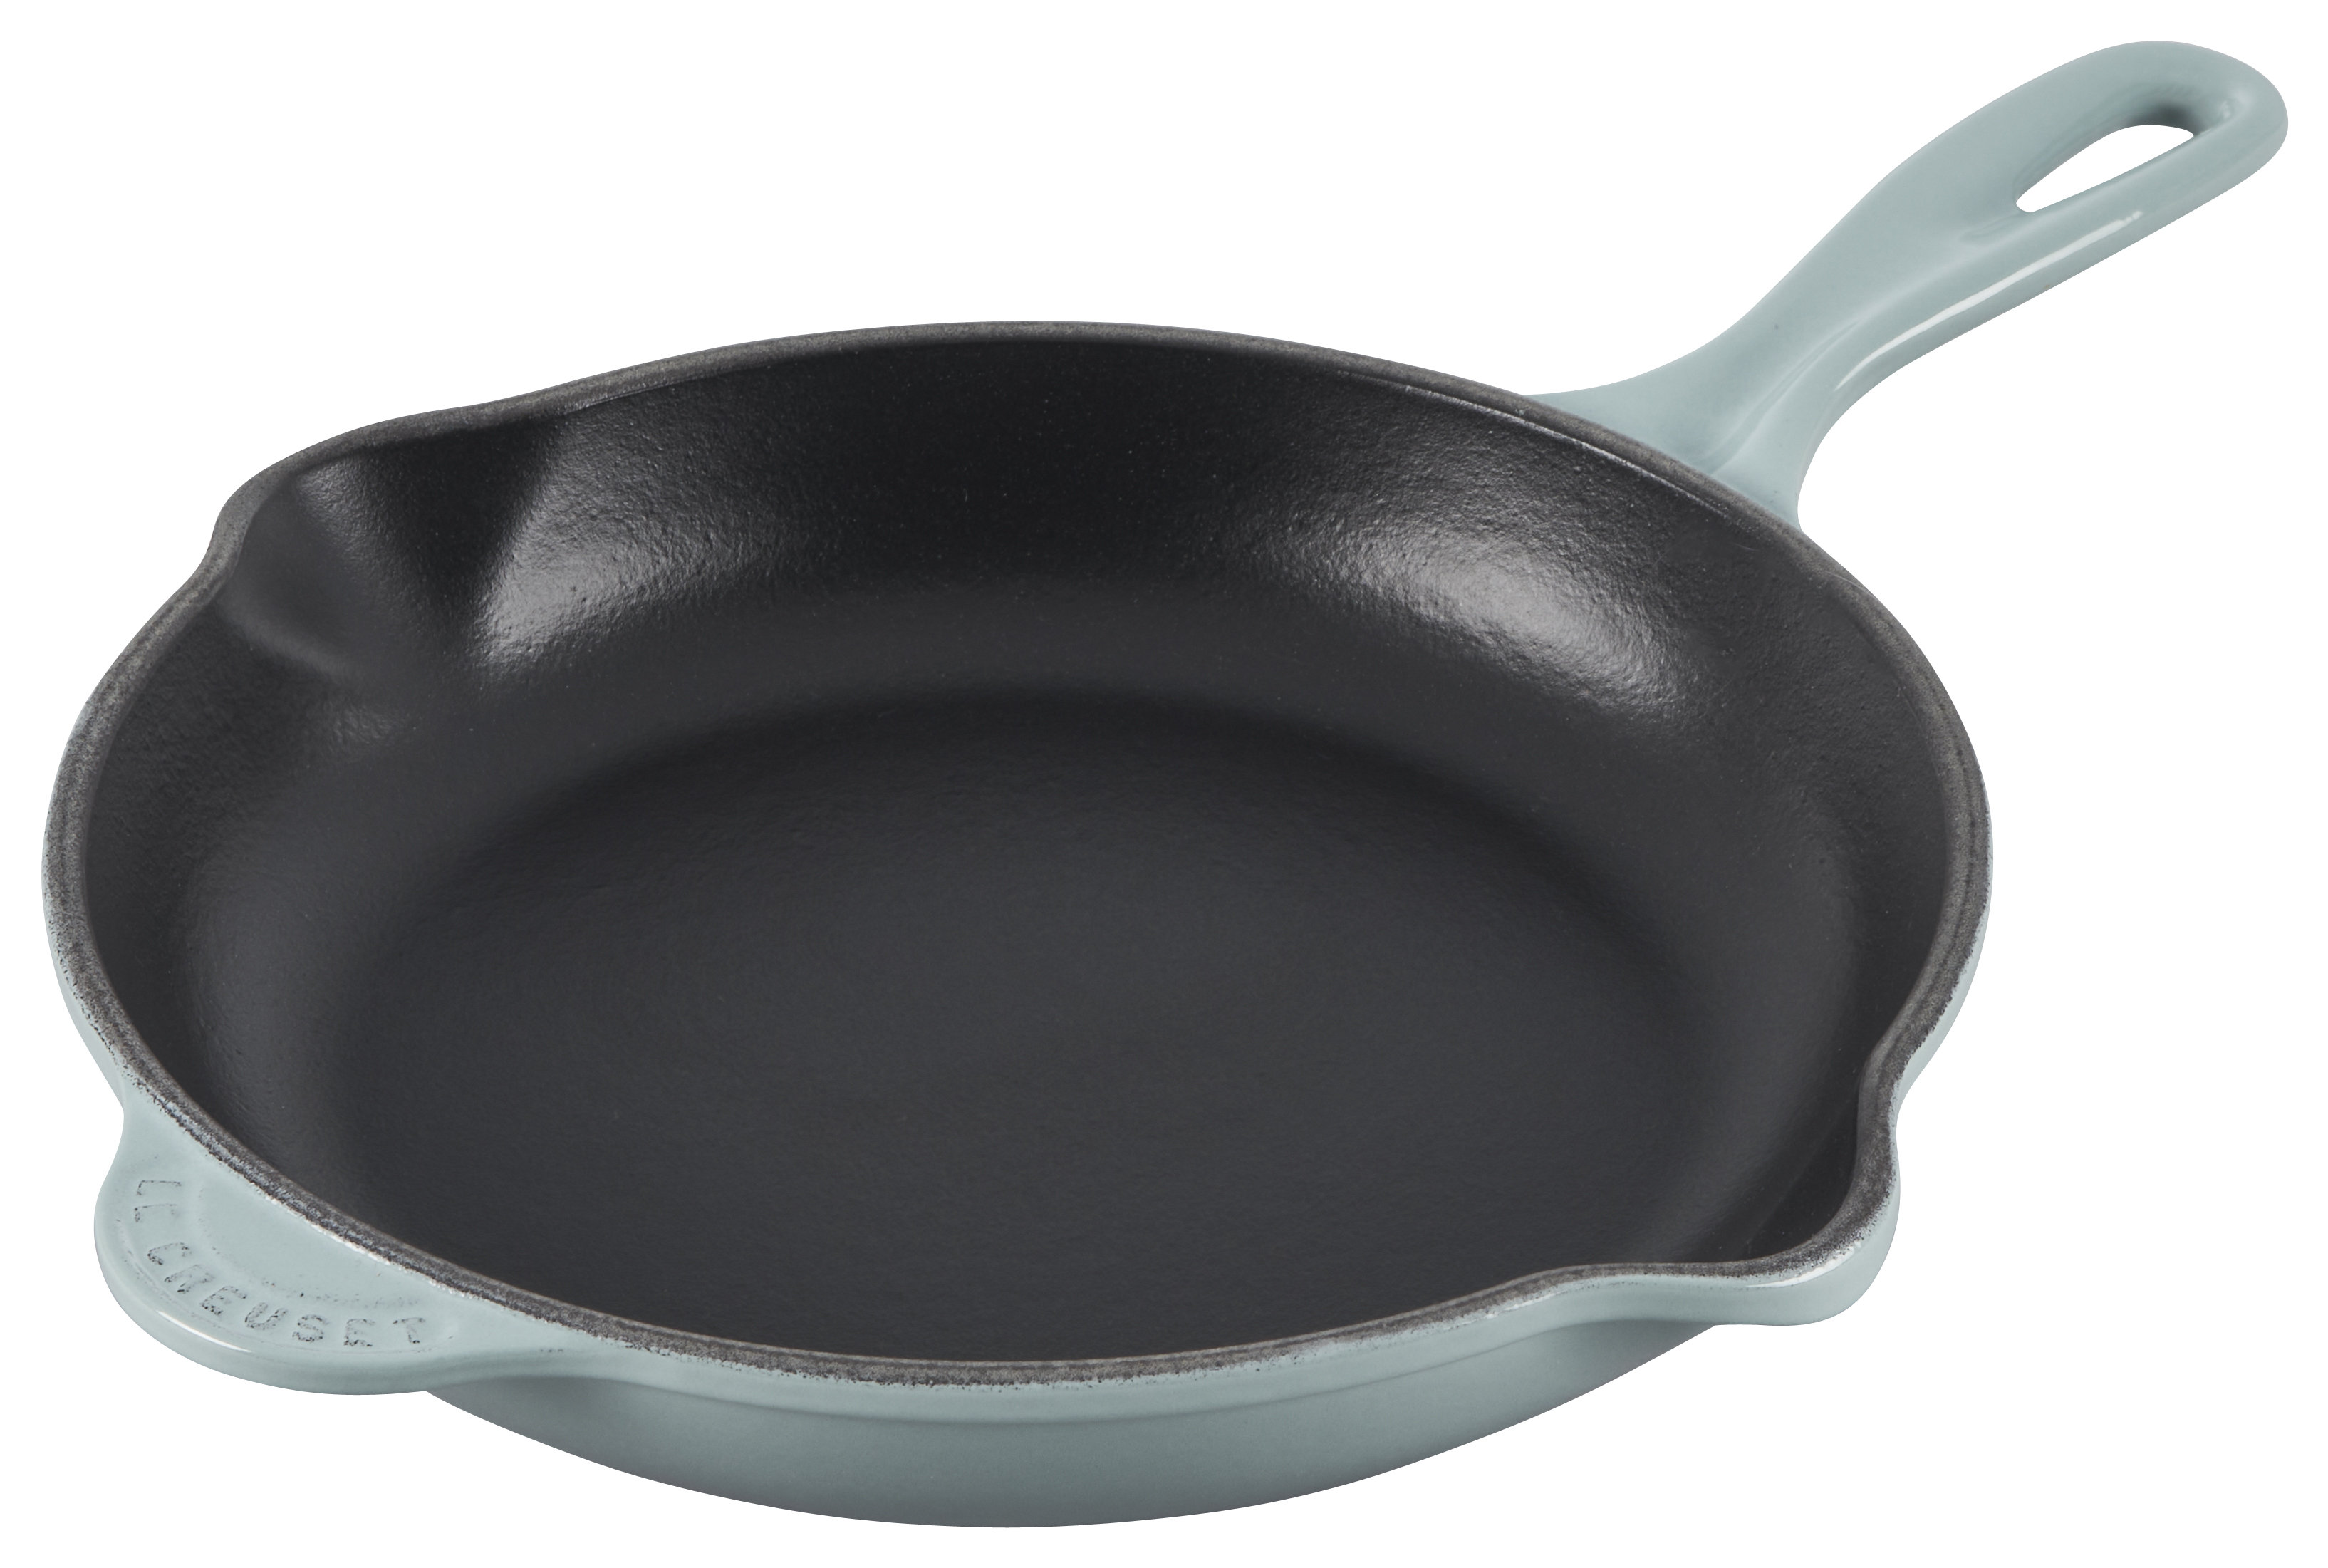 Le Creuset Cast Iron Crepe Pan with Rateau and Spatula & Reviews